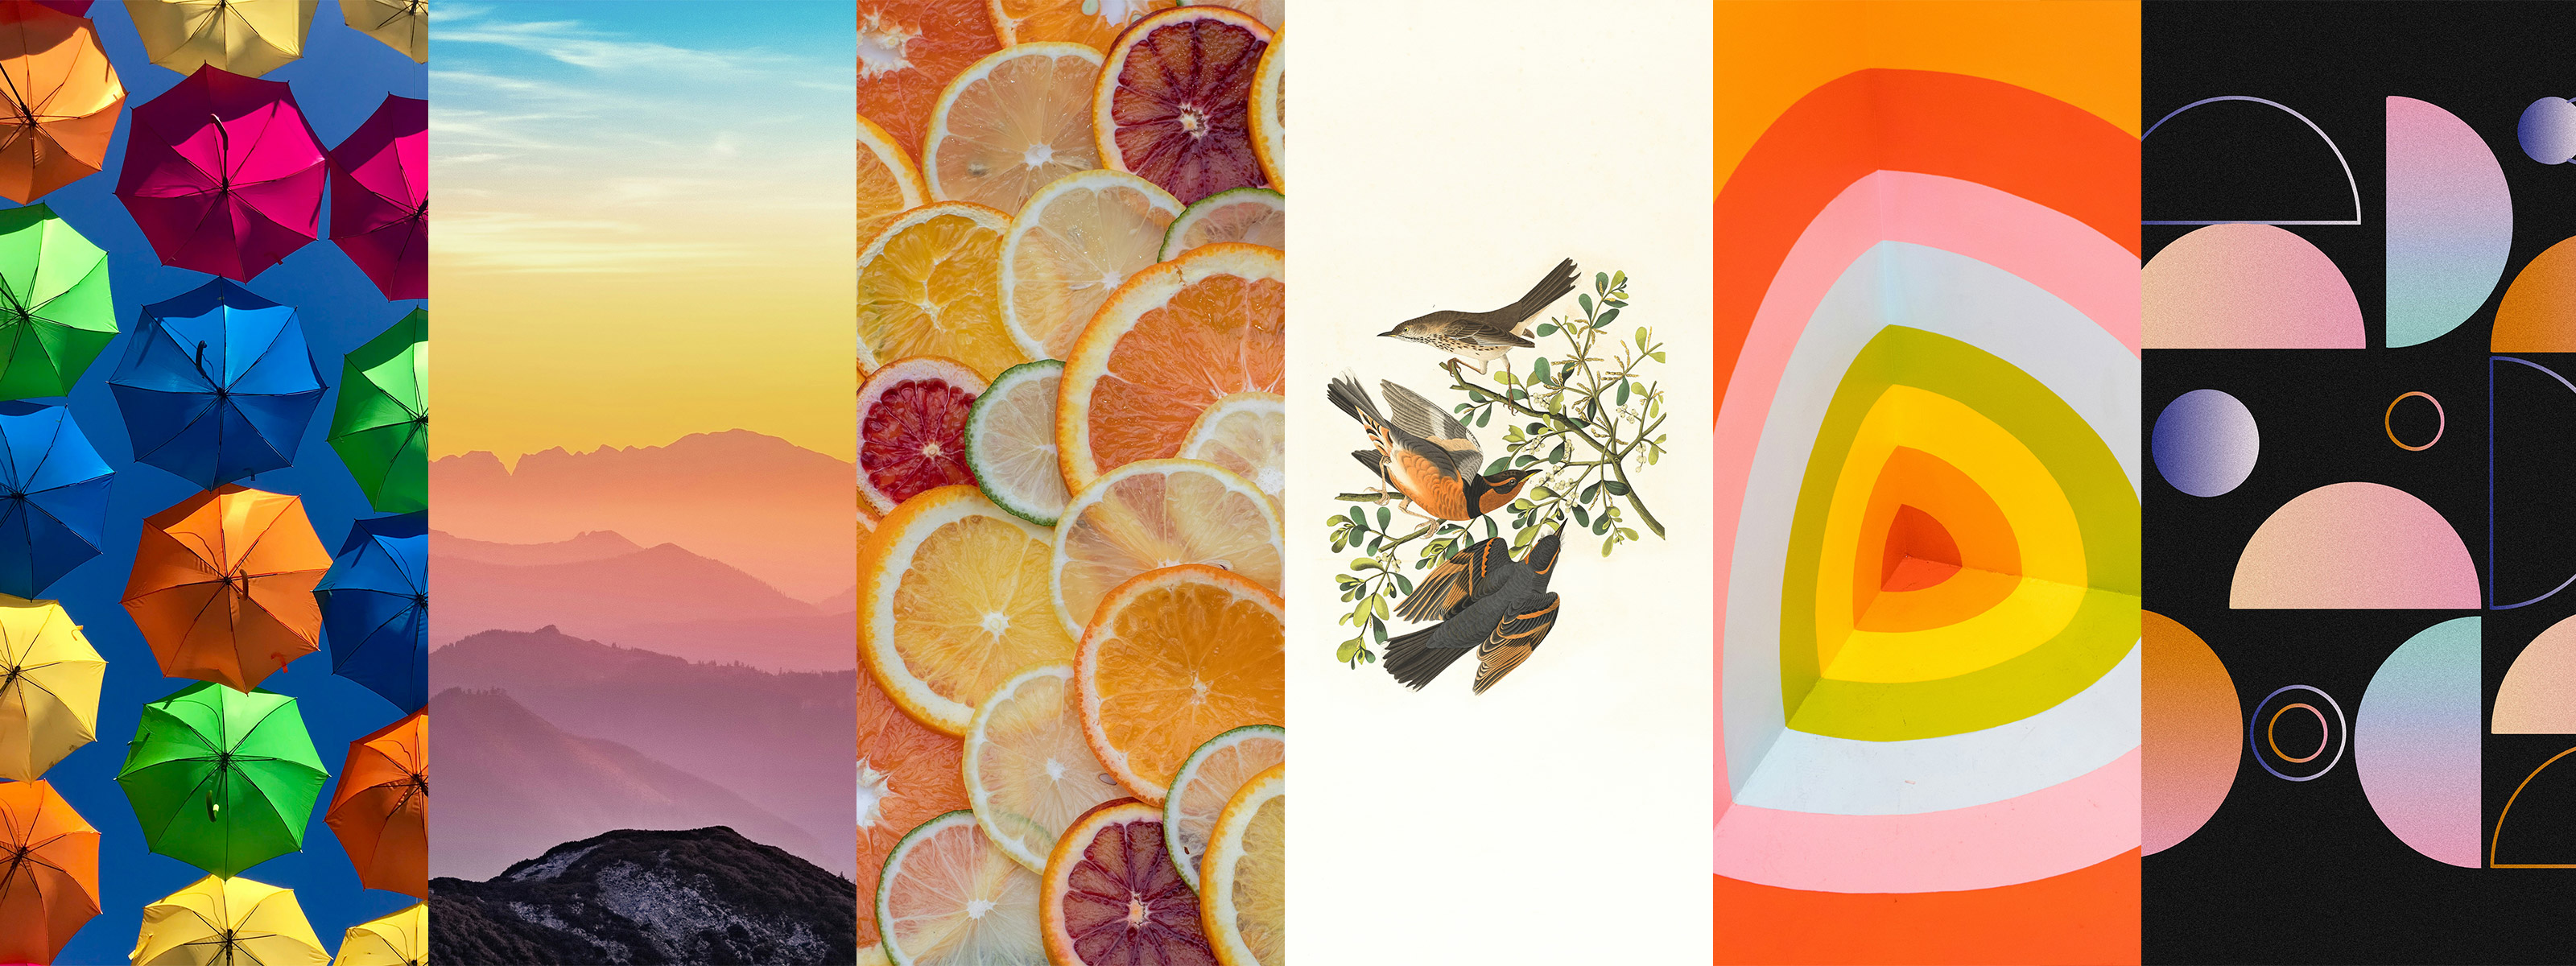 Test images from left to right: Ubrella, Sunset, Citrus, Birds, Colors, Abstract